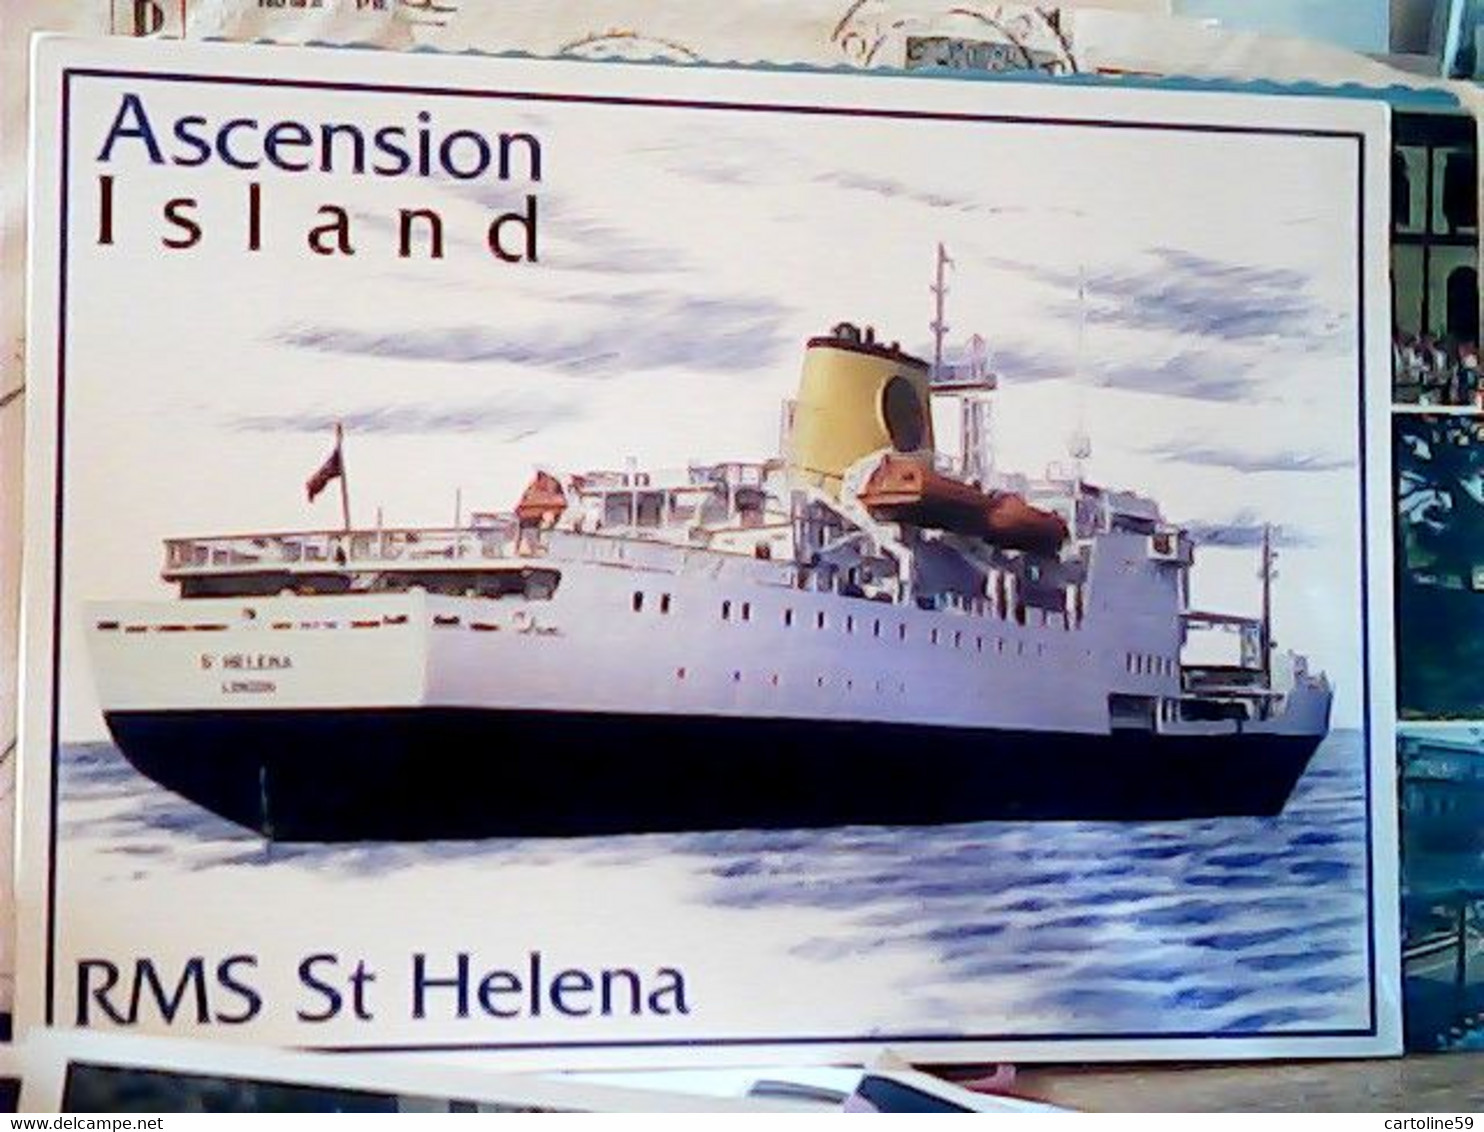 ASCENSION ISLAND NAVE SHIP FERRY  RMS ST HELENA N2000 JG9478 - Ascension Island